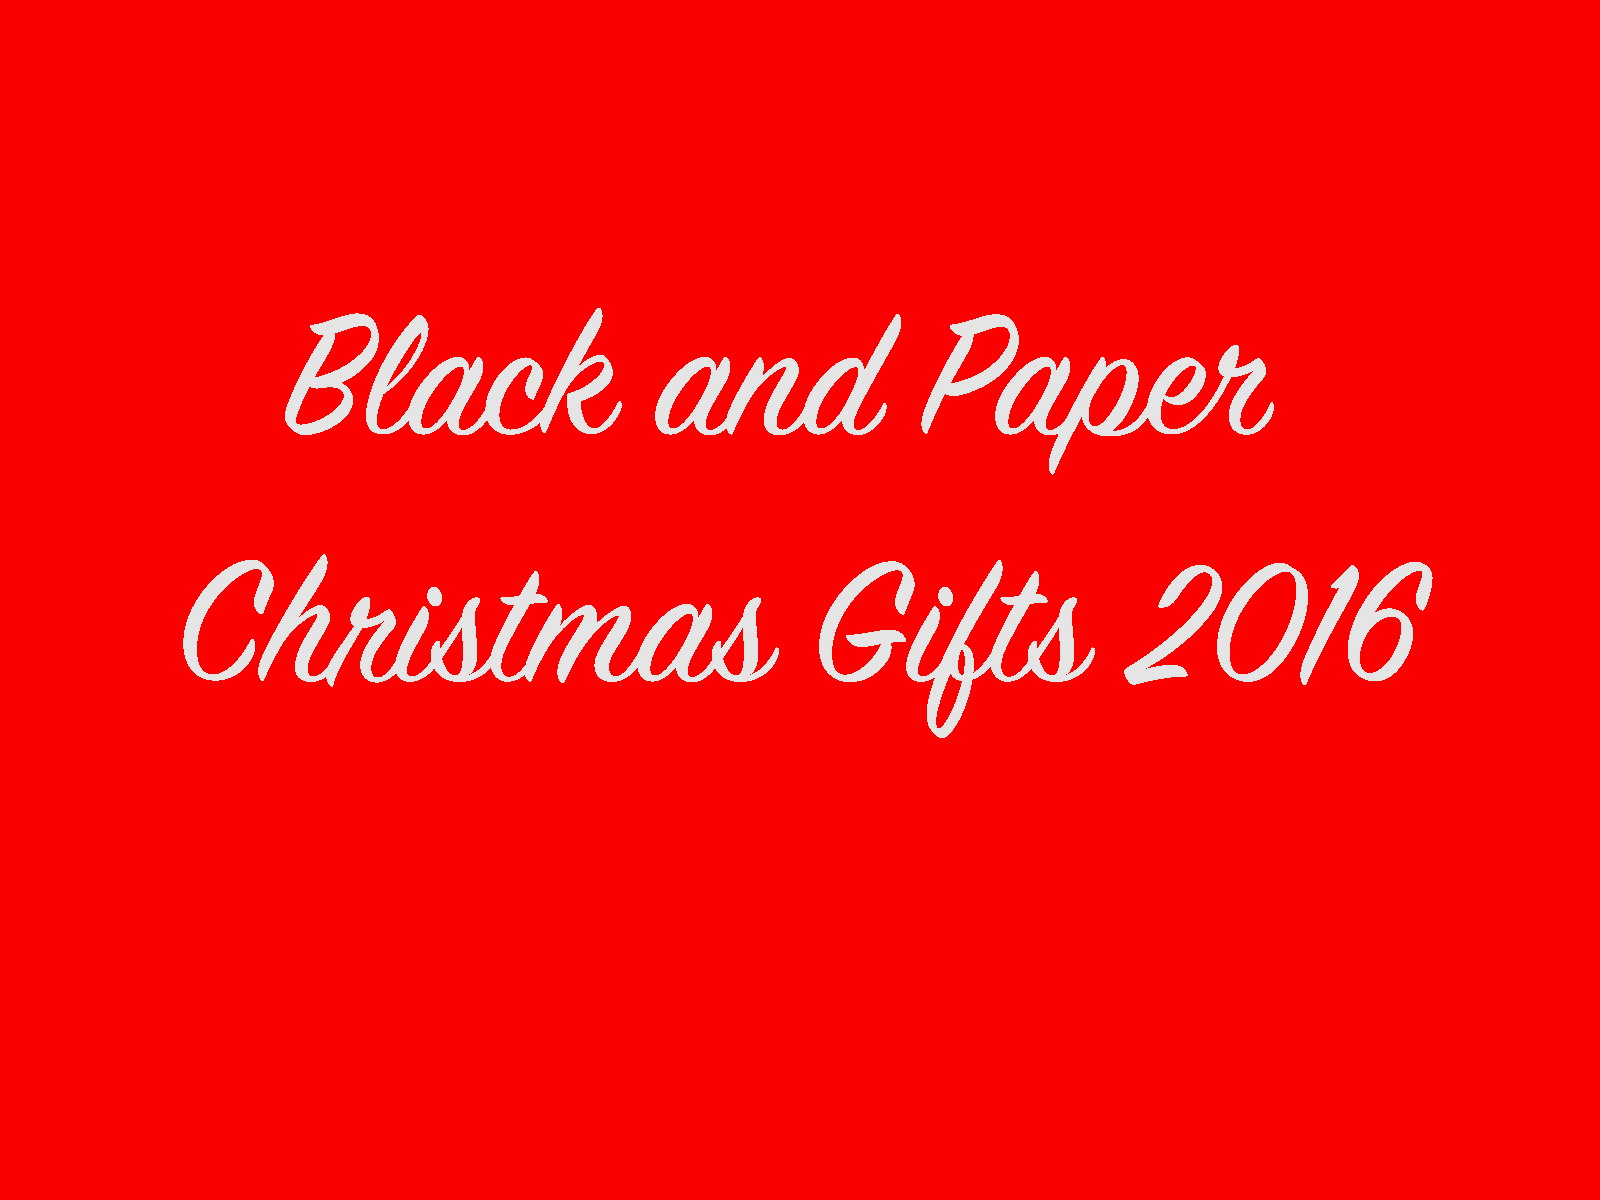 Black and Paper Christmas List 2016 Travel